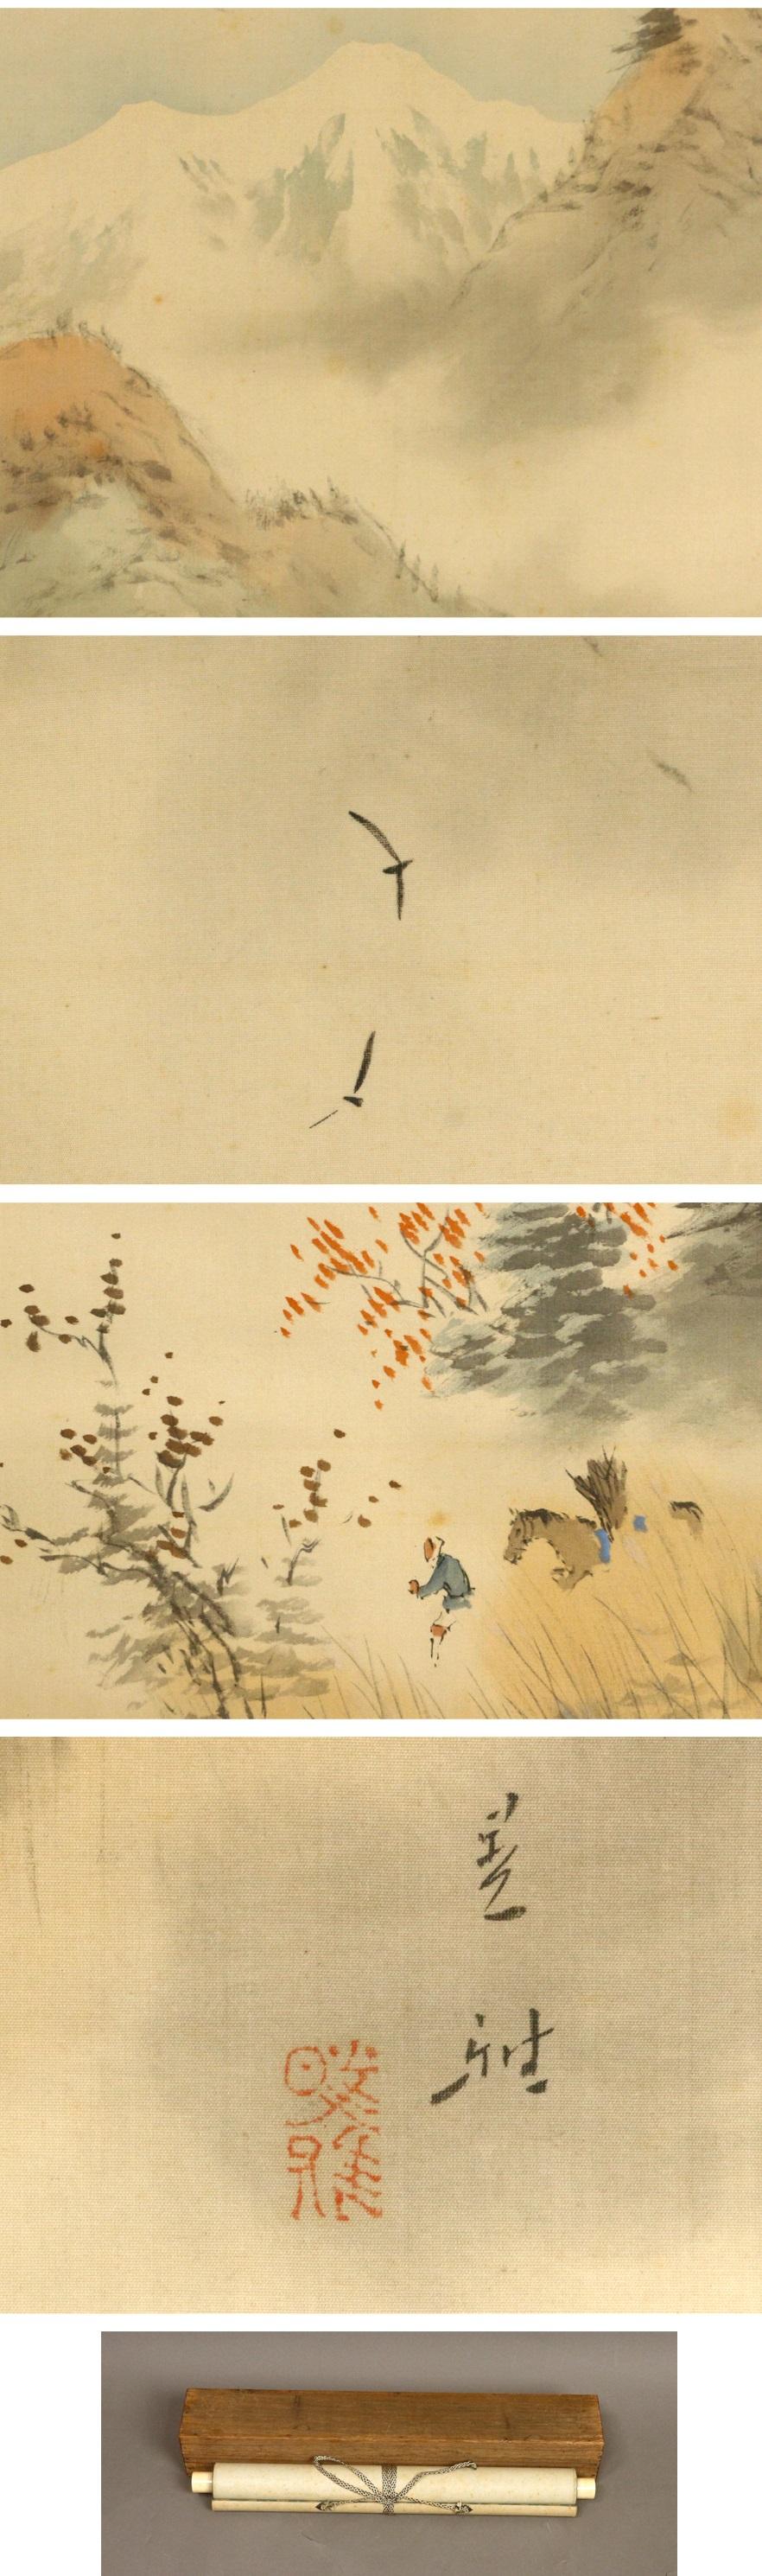 As you can see, Japanese painting late autumn Akino map / with box.
It is
a beautiful work that depicts the melancholy scenery of Akino, which is unique to late autumn , and is composed of a light and calm texture.

¦ Silk book / handwriting.
¦